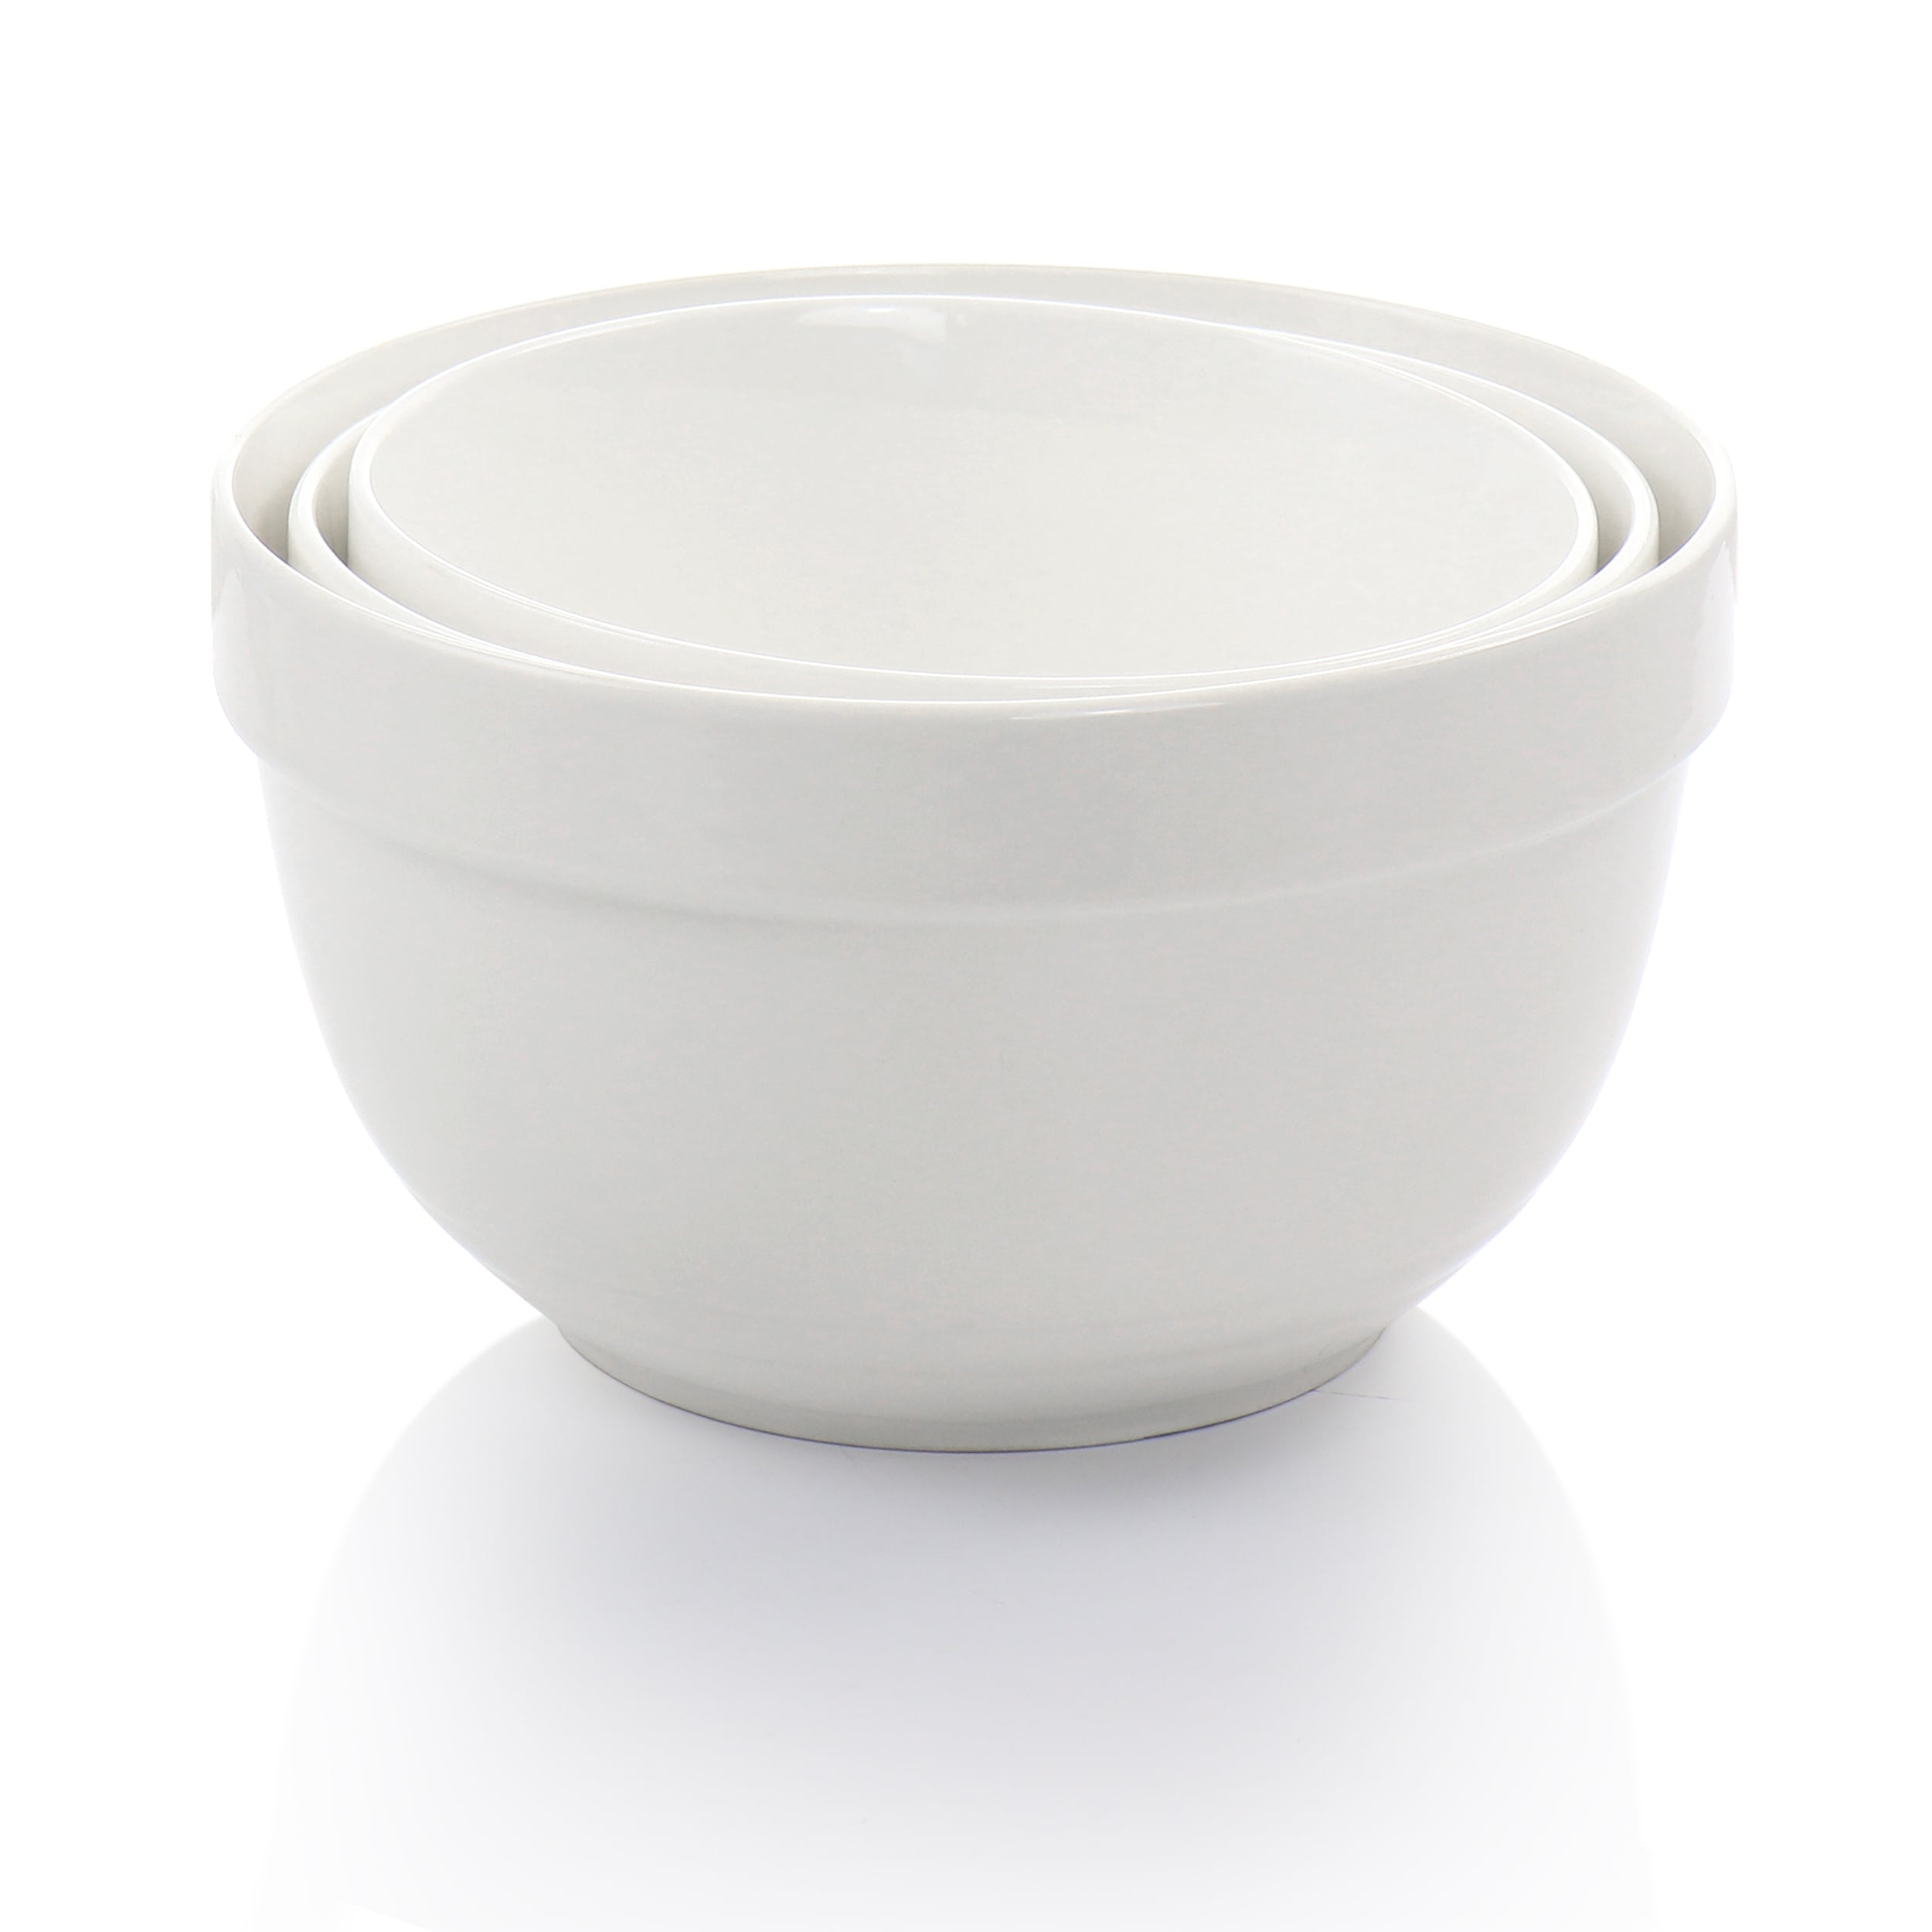 https://ak1.ostkcdn.com/images/products/is/images/direct/9e9ab74817debed0ace94c30b730326288941027/3-Piece-Ceramic-Mixing-Bowl-Set.jpg